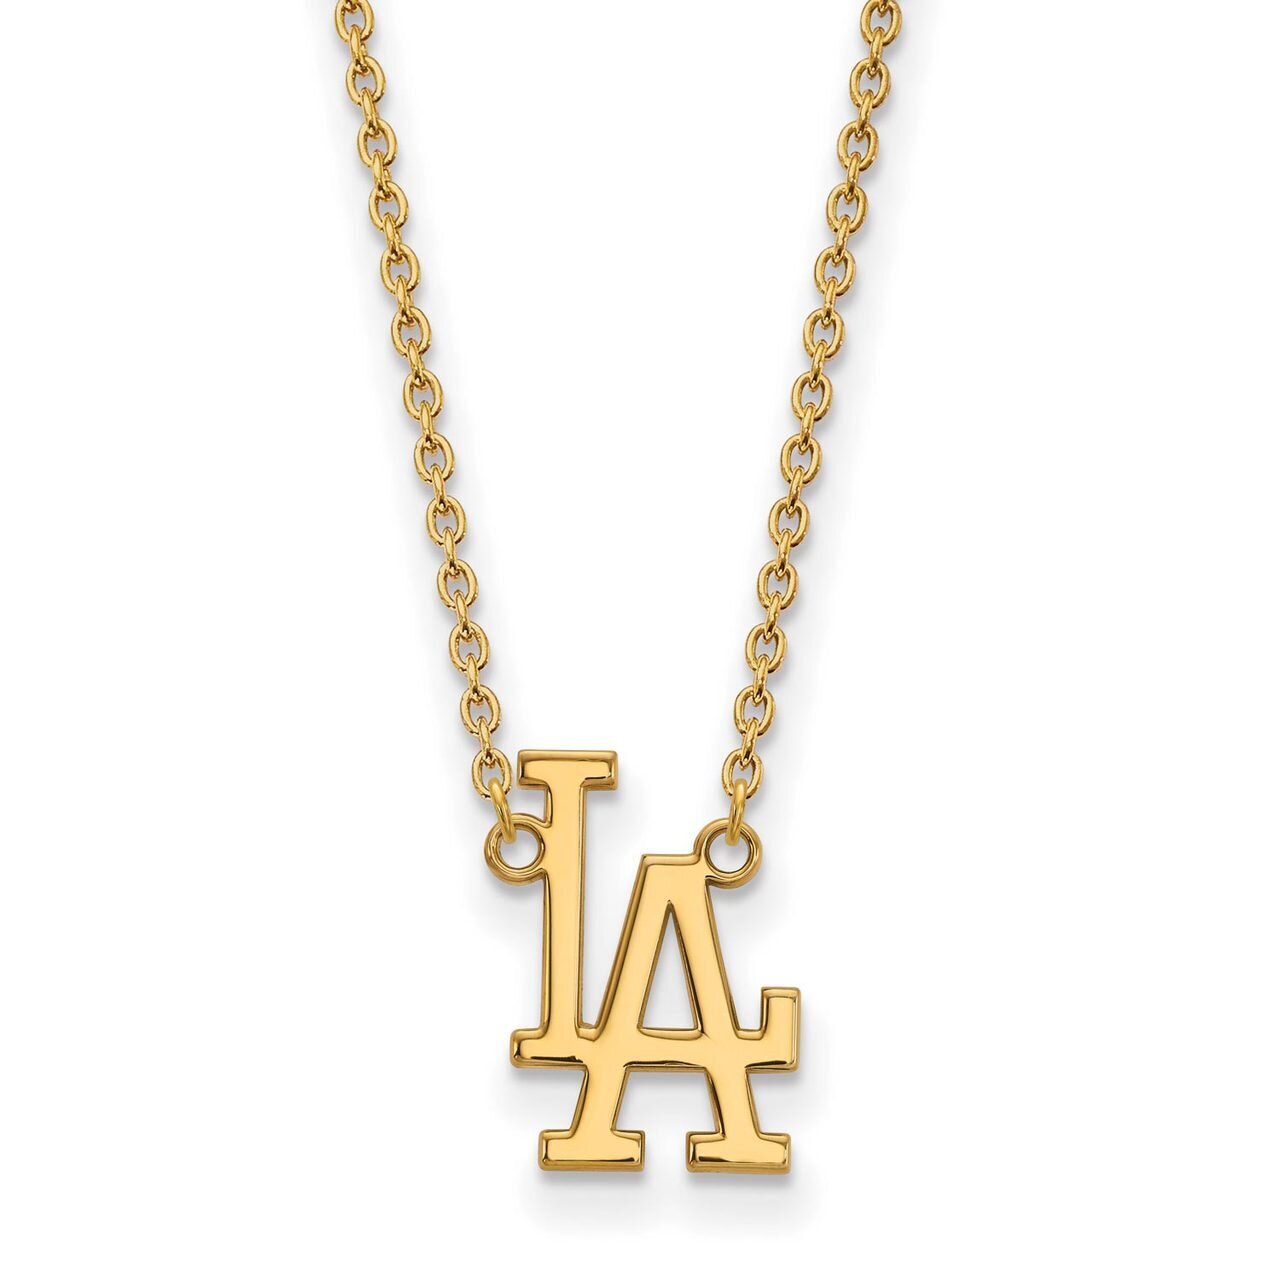 Los Angeles Dodgers Large Pendant with Chain Necklace 10k Yellow Gold 1Y009DOD-18